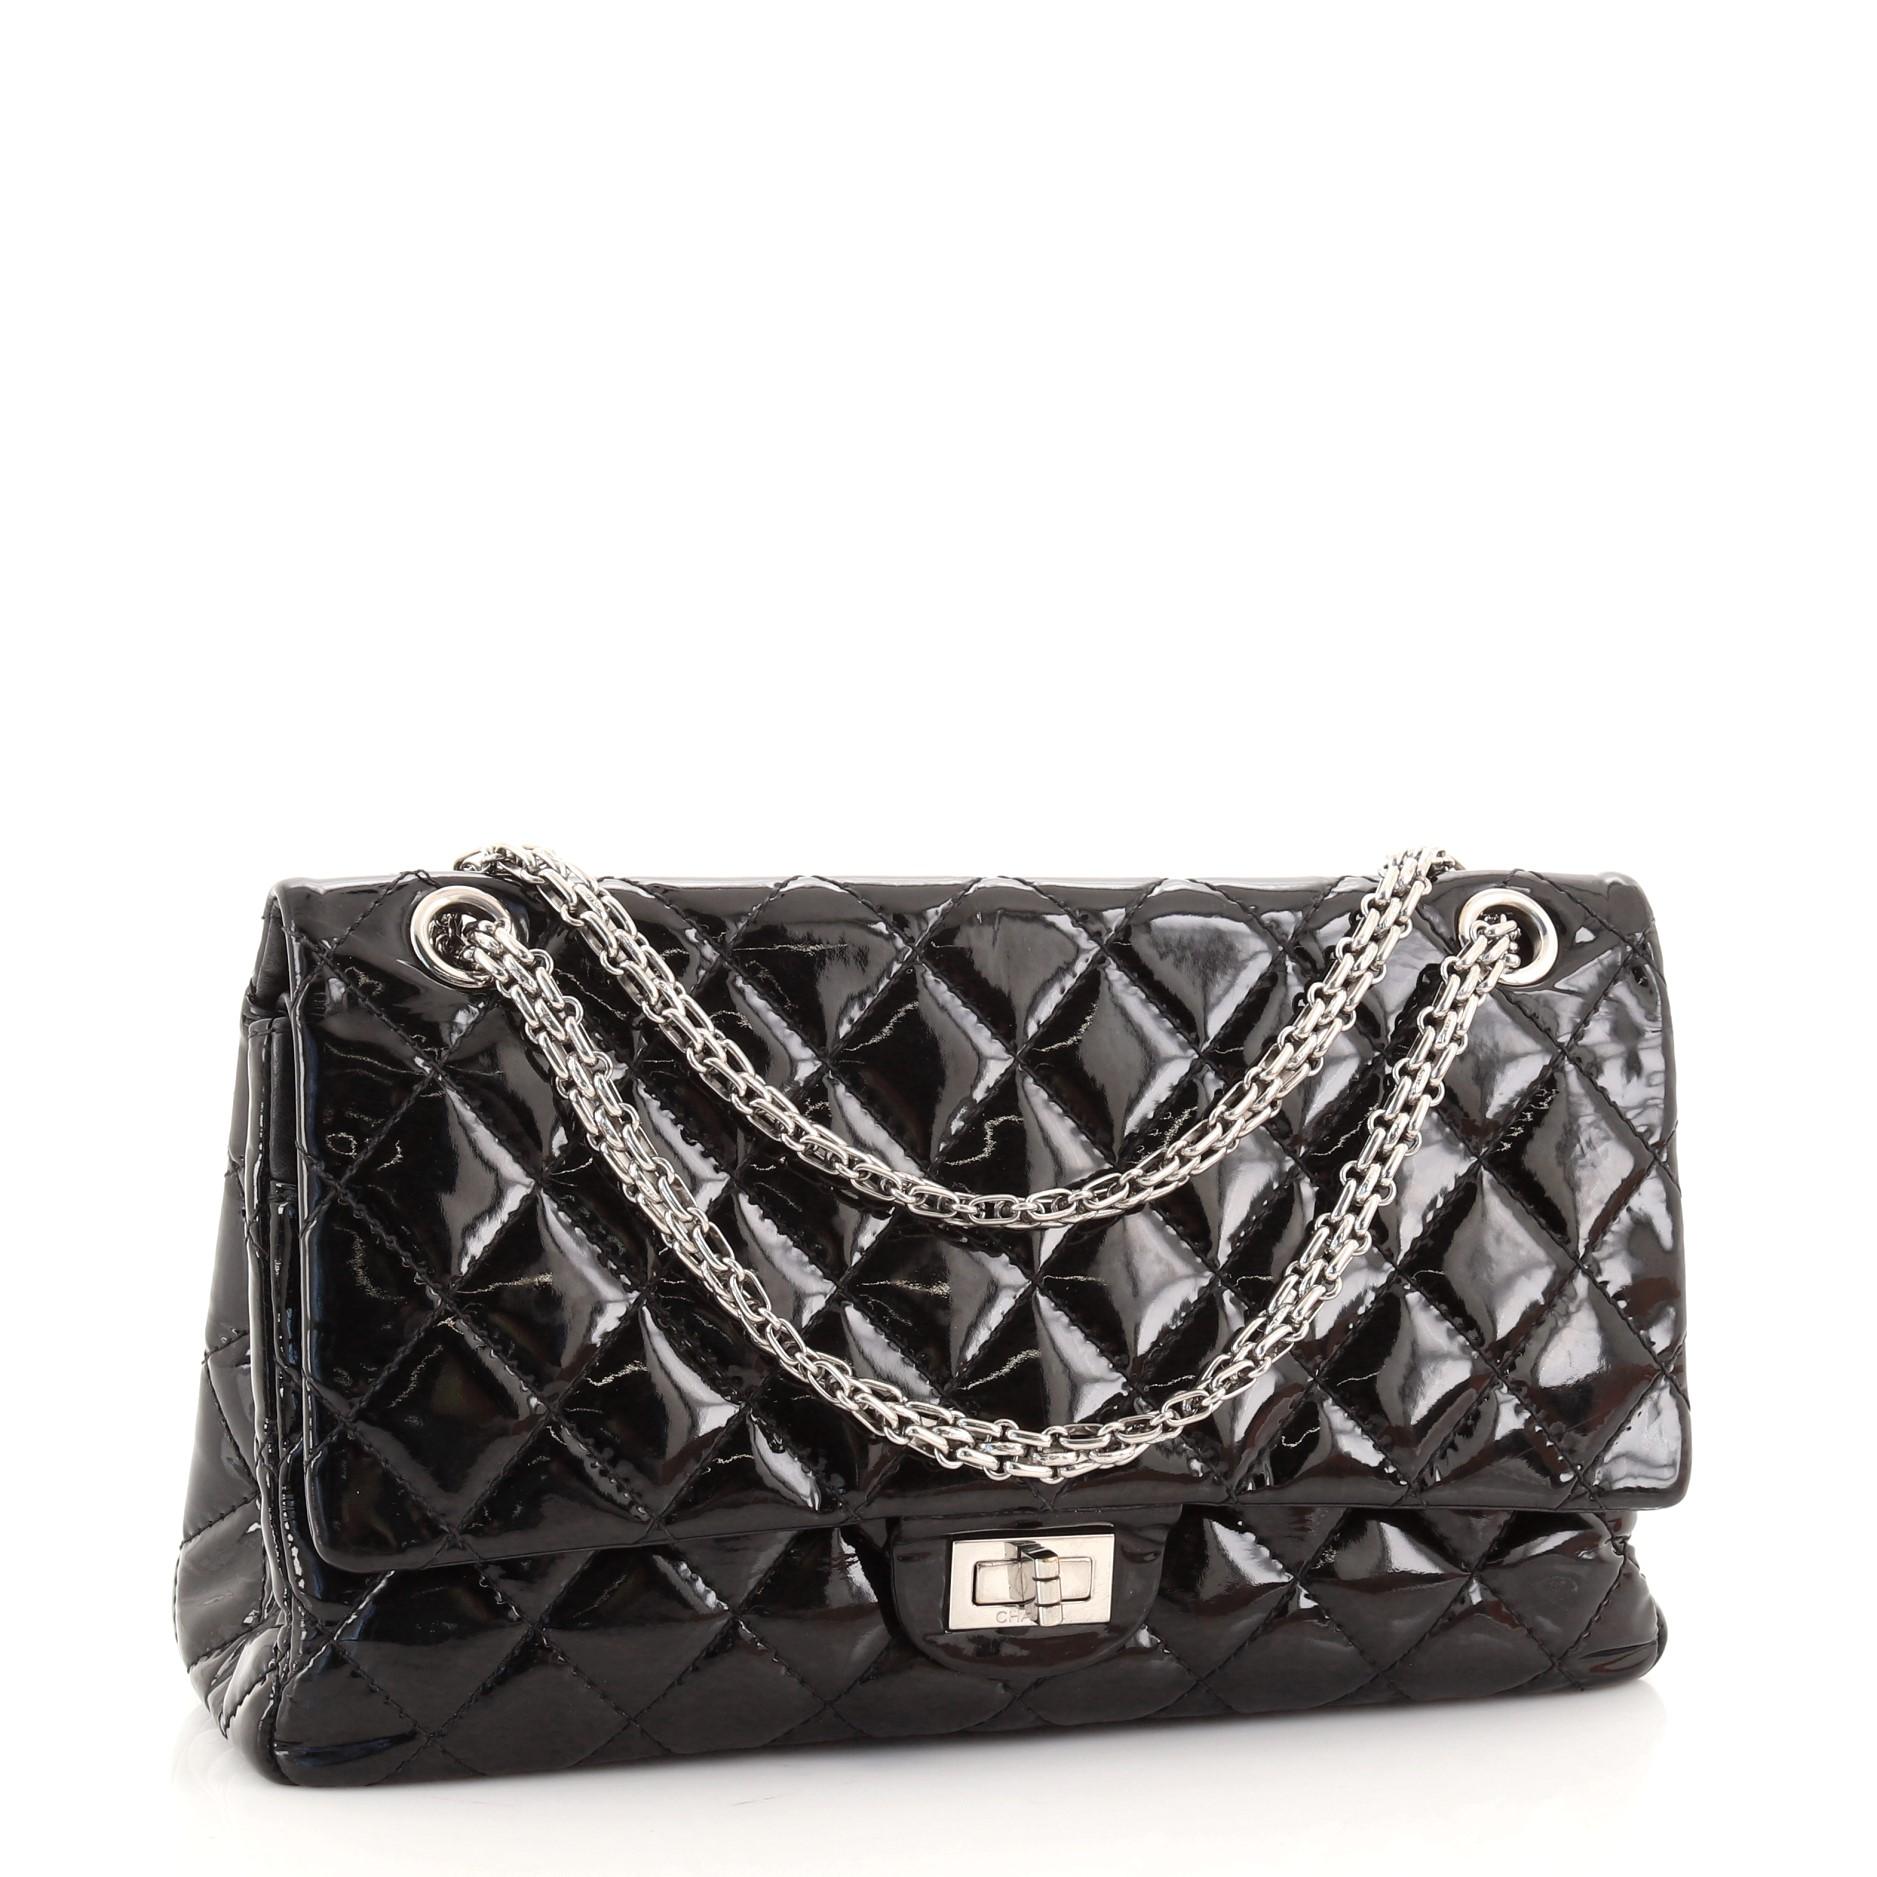 Black Chanel Reissue 2.55 Flap Bag Quilted Patent 226